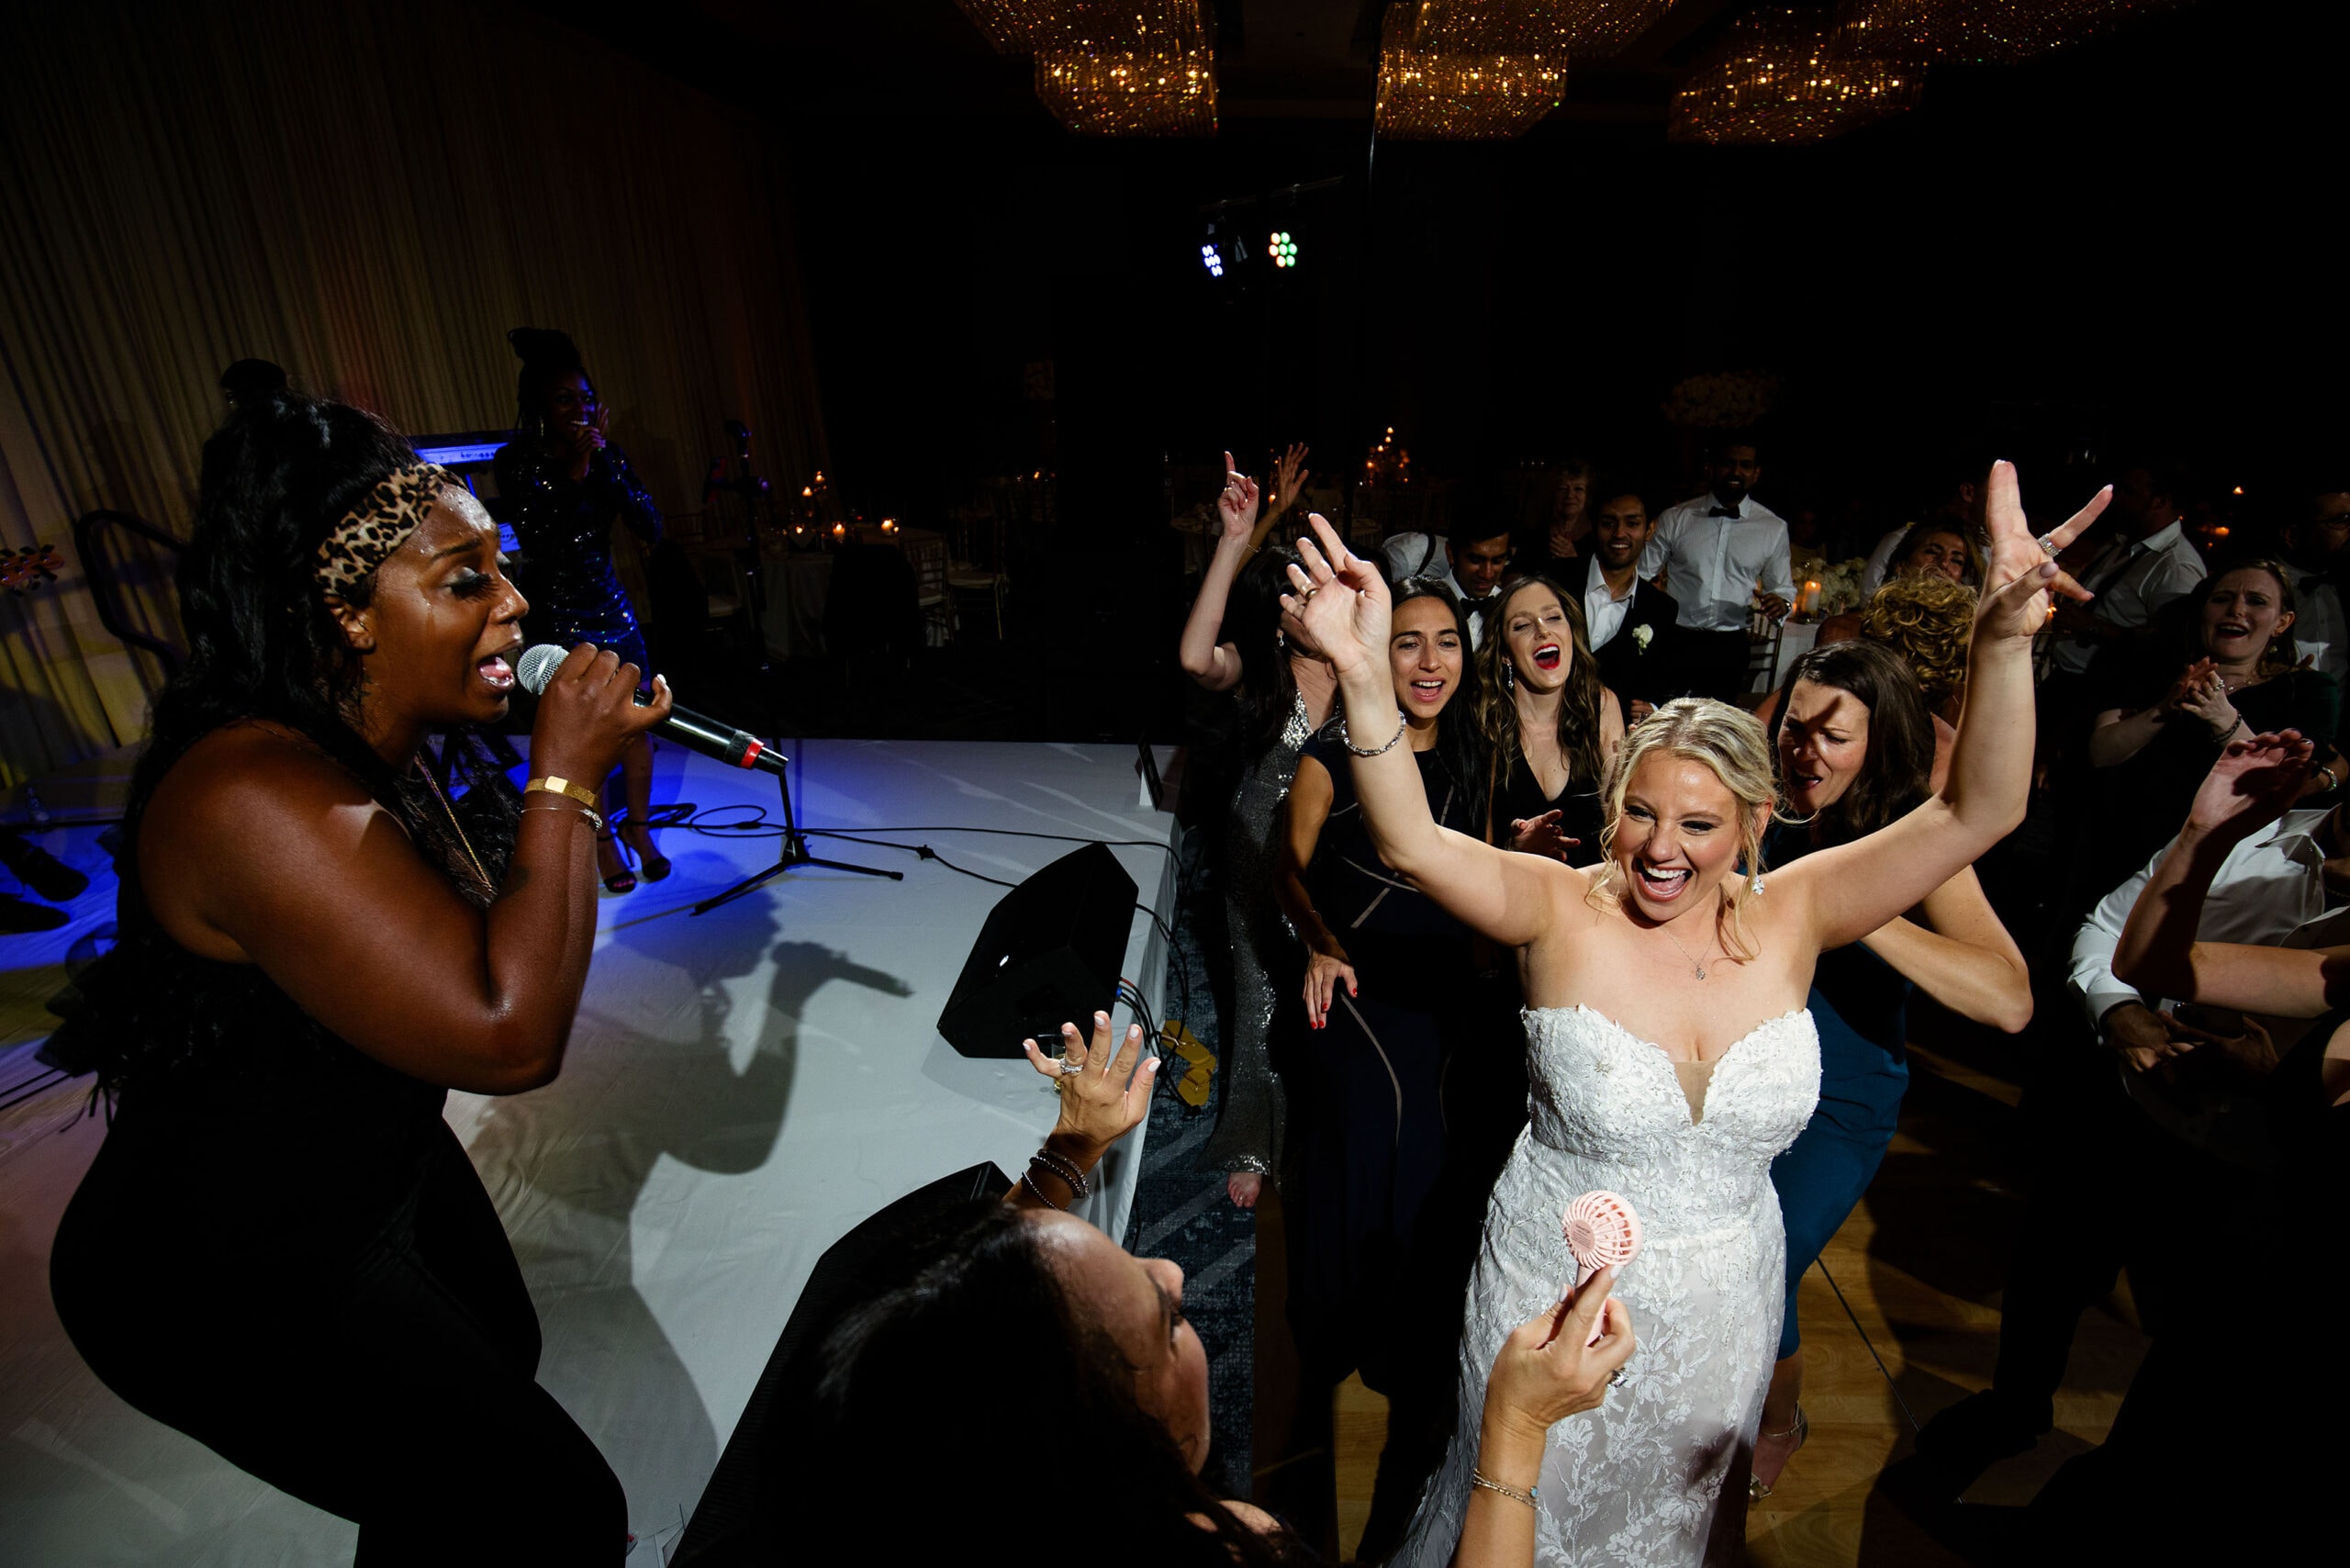 A singer from Bounce Band performs as the bride dances during her wedding reception at Four Seasons Hotel Denver